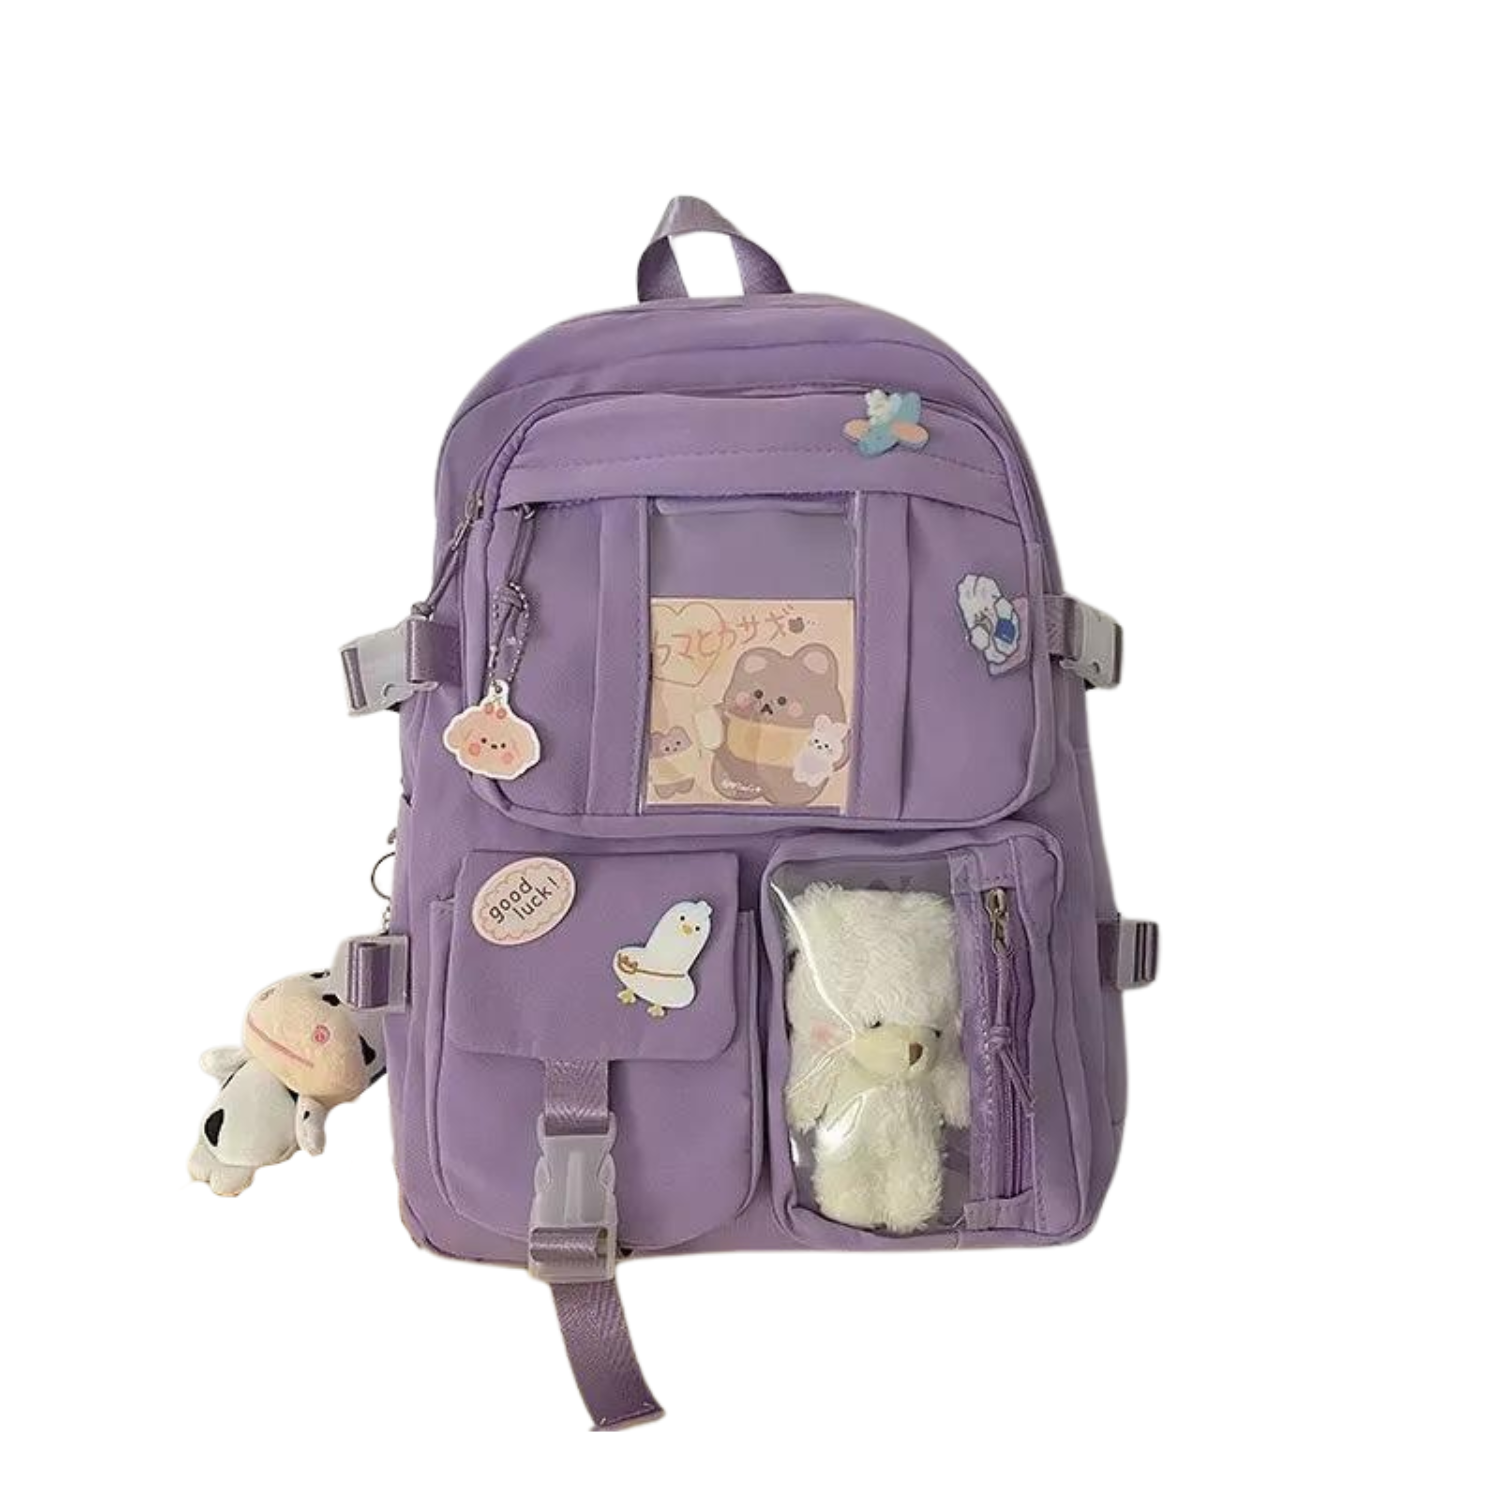 Stylish Multi-Pocket Backpack with Charm Details